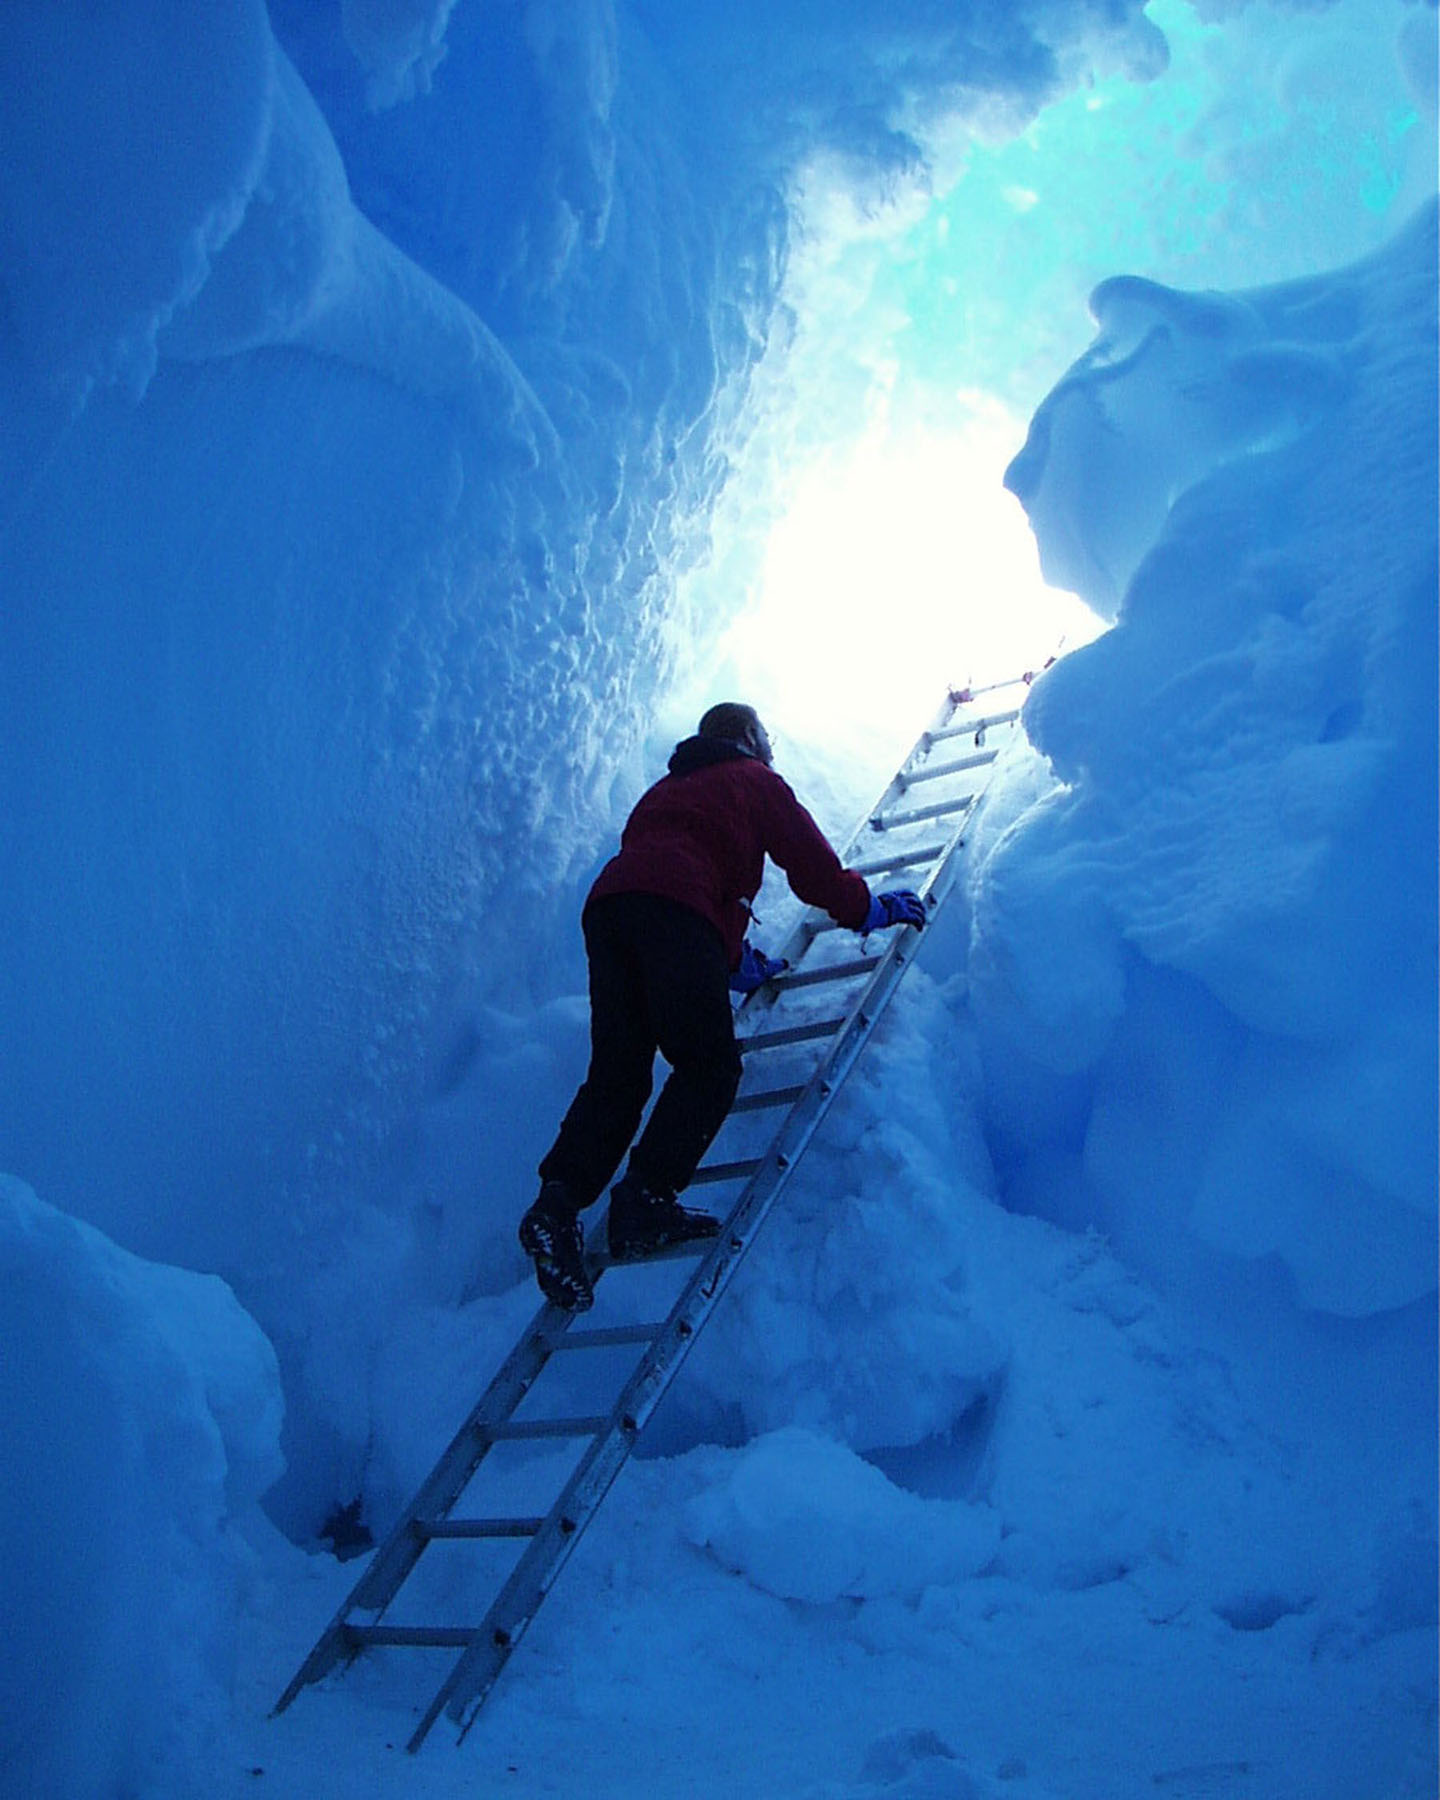 A person on a ladder in a bluish snow cave.